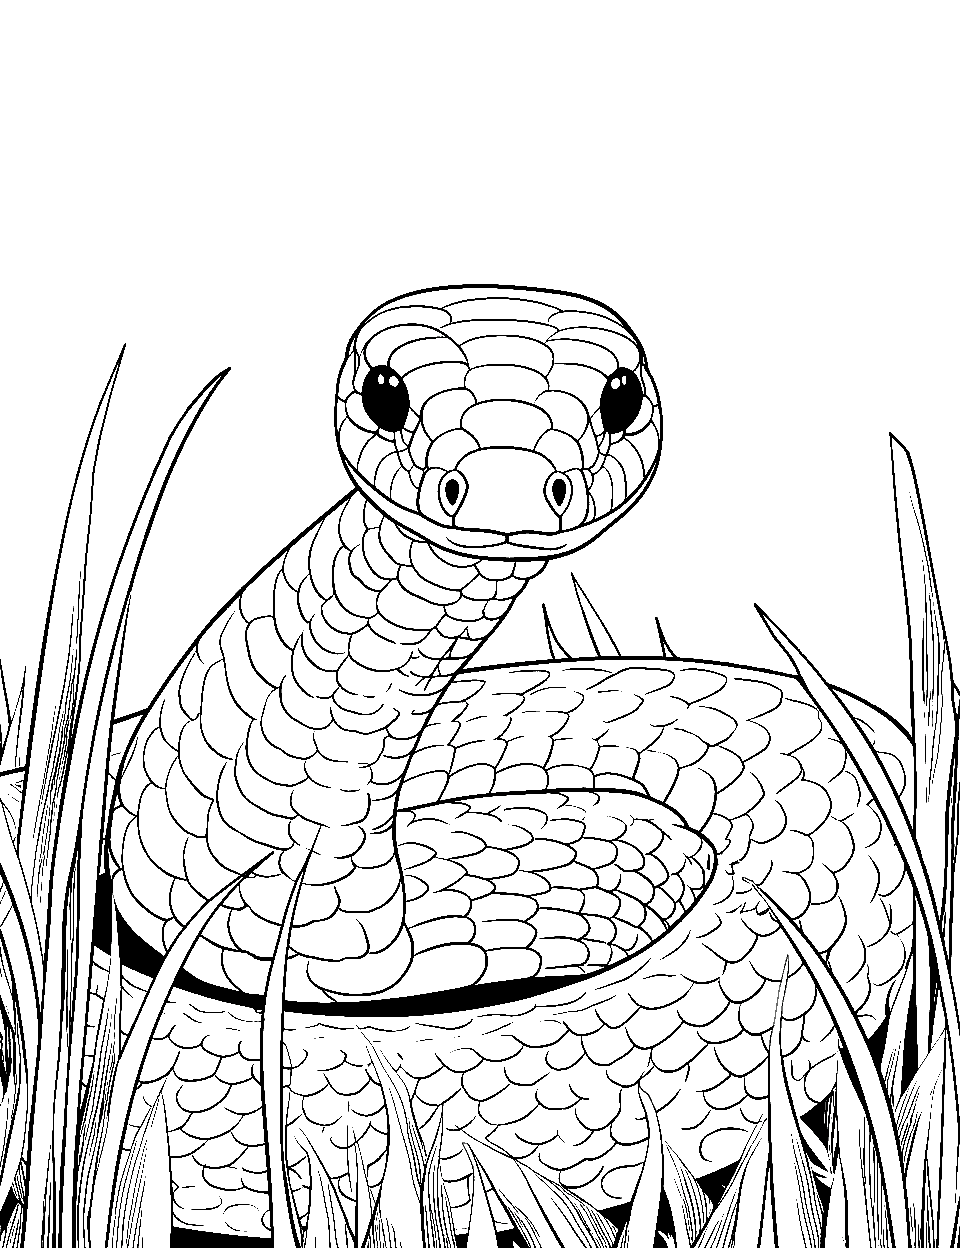 Snake in the Grass Coloring Page - A fierce snake steadily waiting in tall grass for its prey to come.